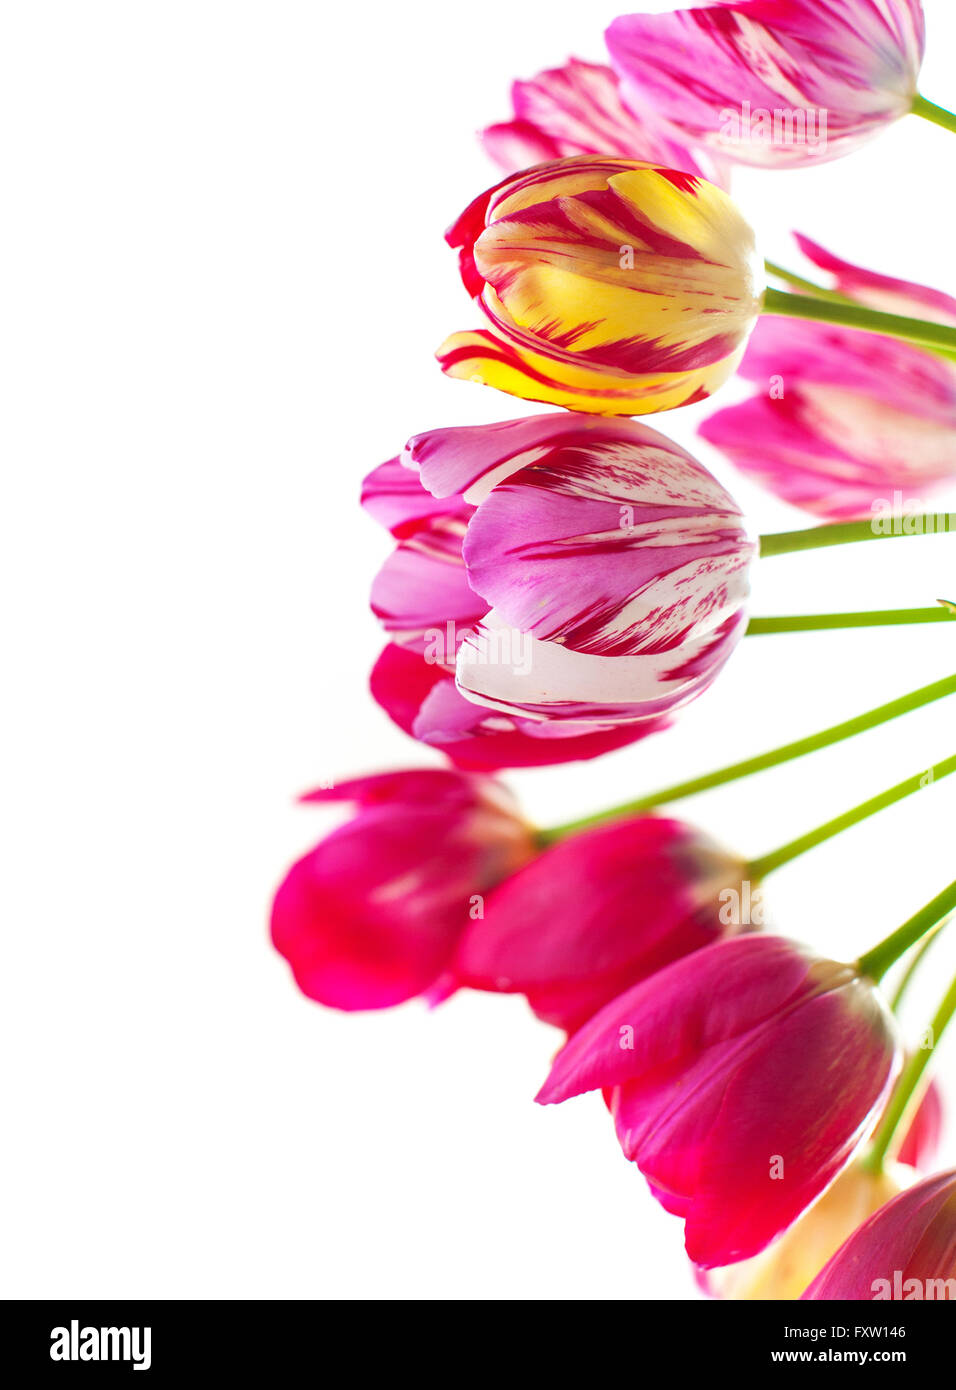 Tulips on a white background with space for text Stock Photo